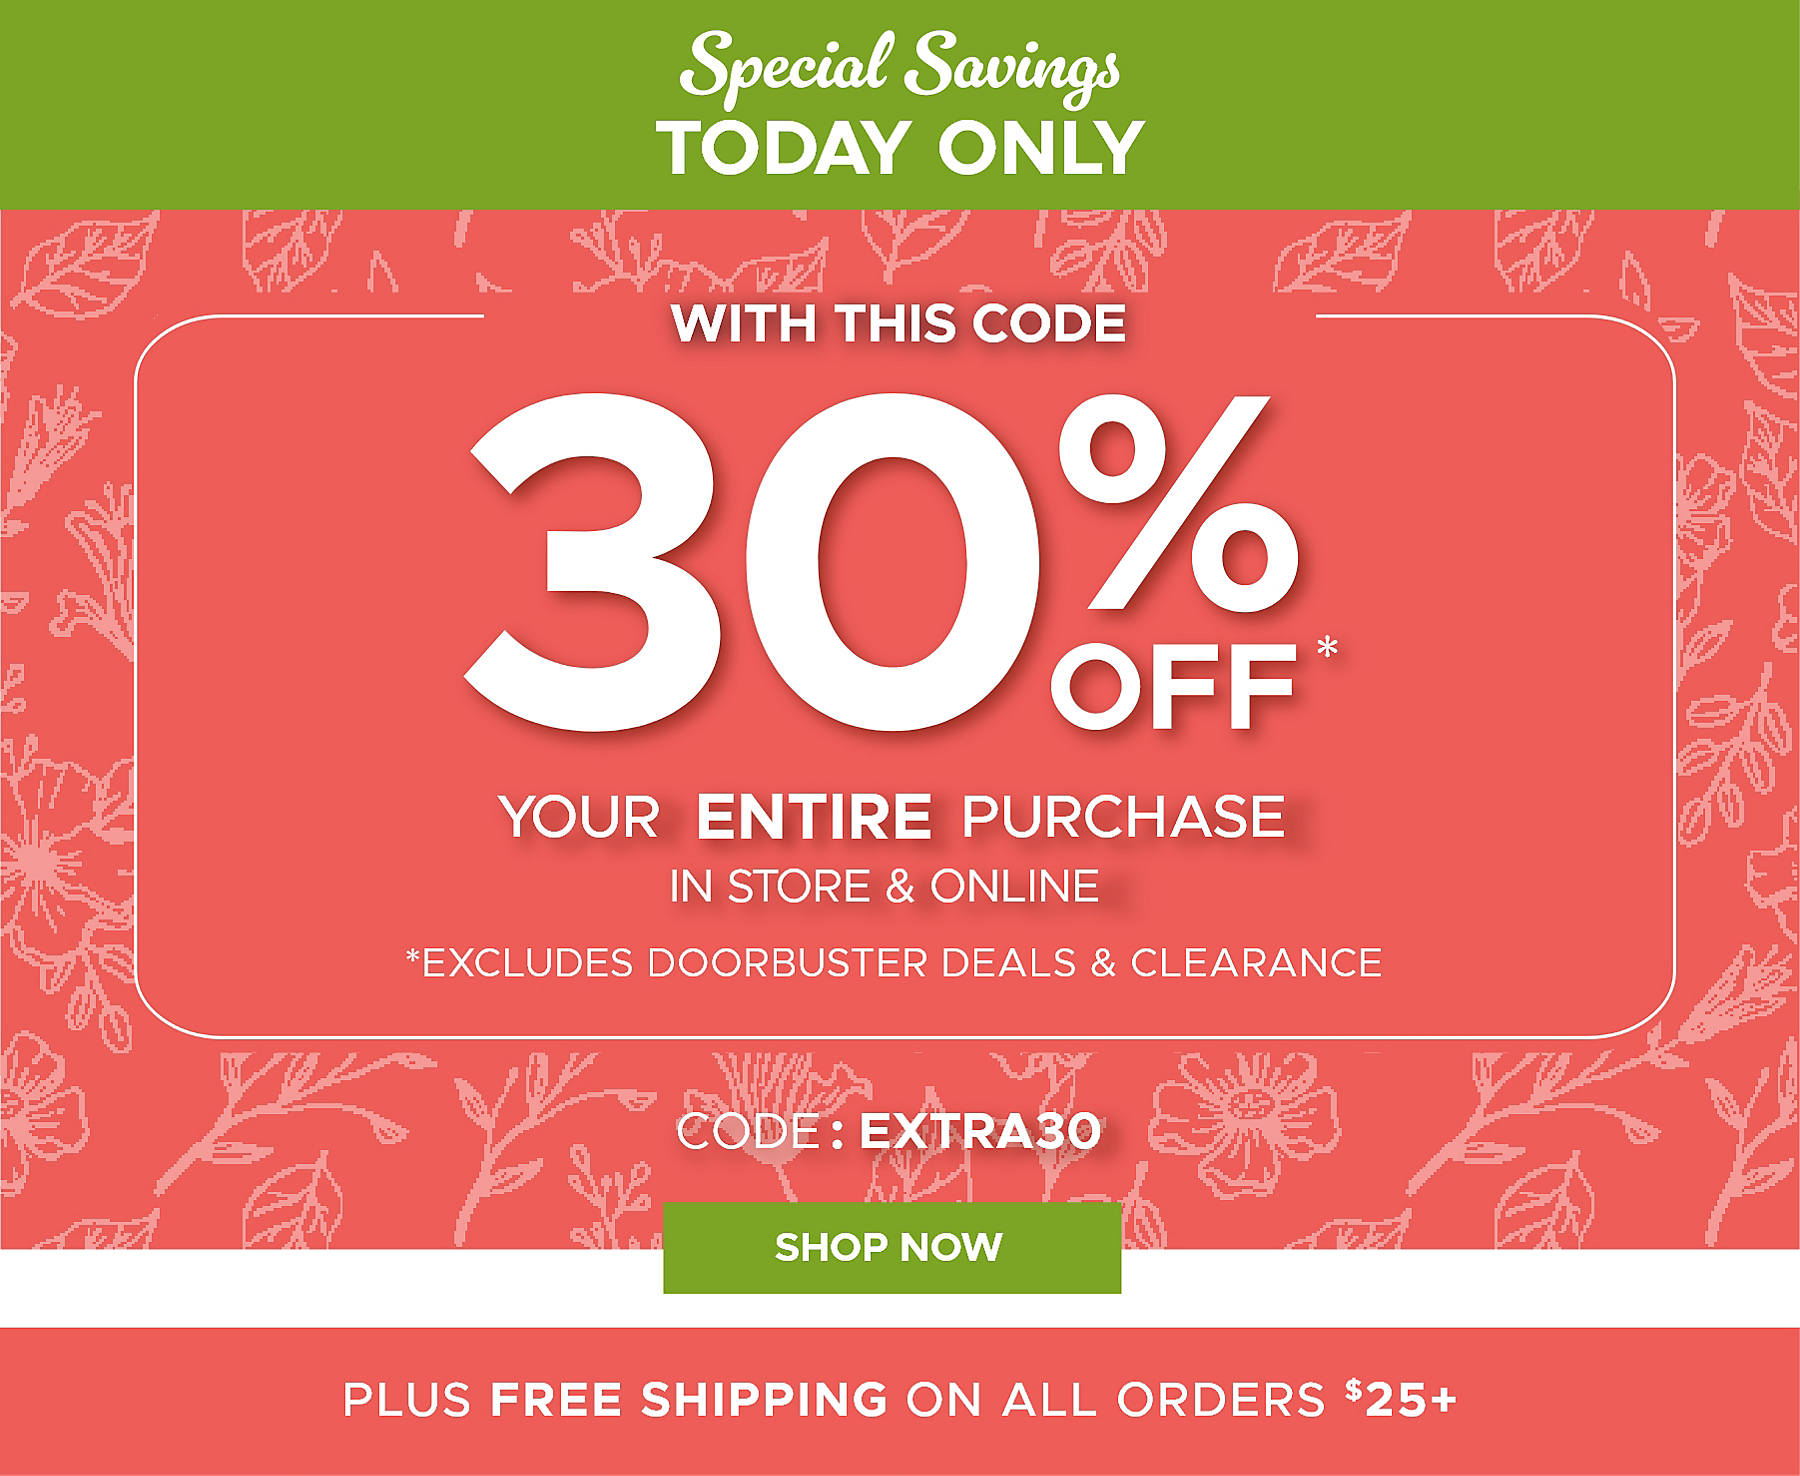 Special Savings Today Only with this code 30% off* Your Entire Purchase code: EXTRA30 in store and online *excludes doorbusters and clearance Shop Now Plus Free Shipping on All Orders $25+